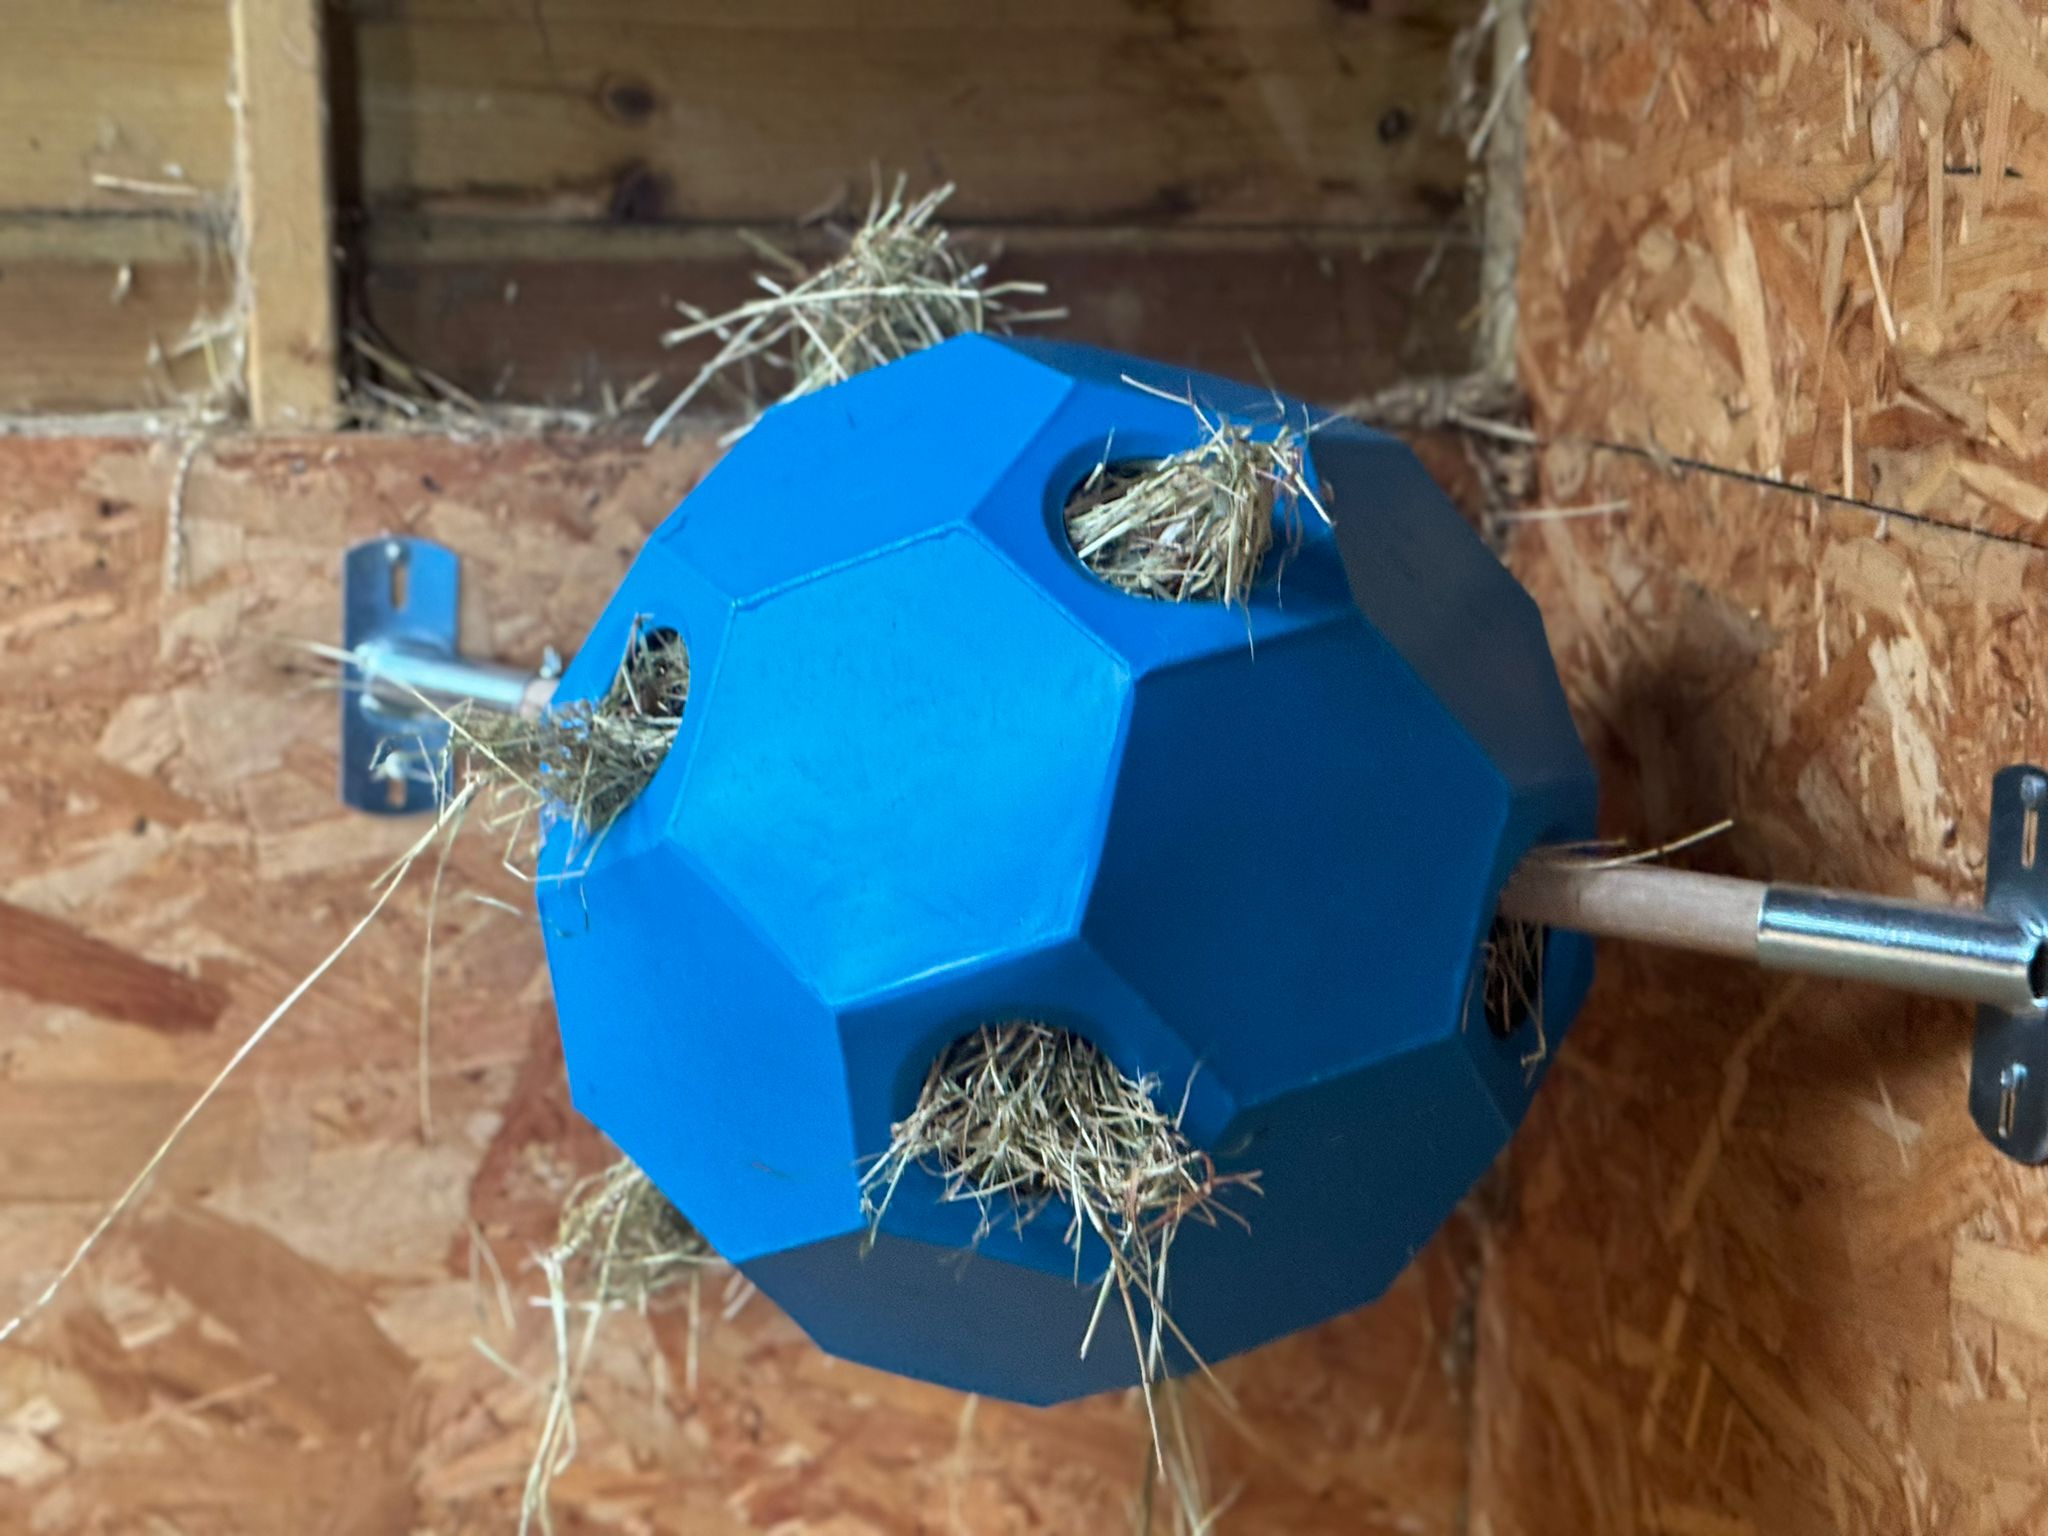 The Hay Play Spinner